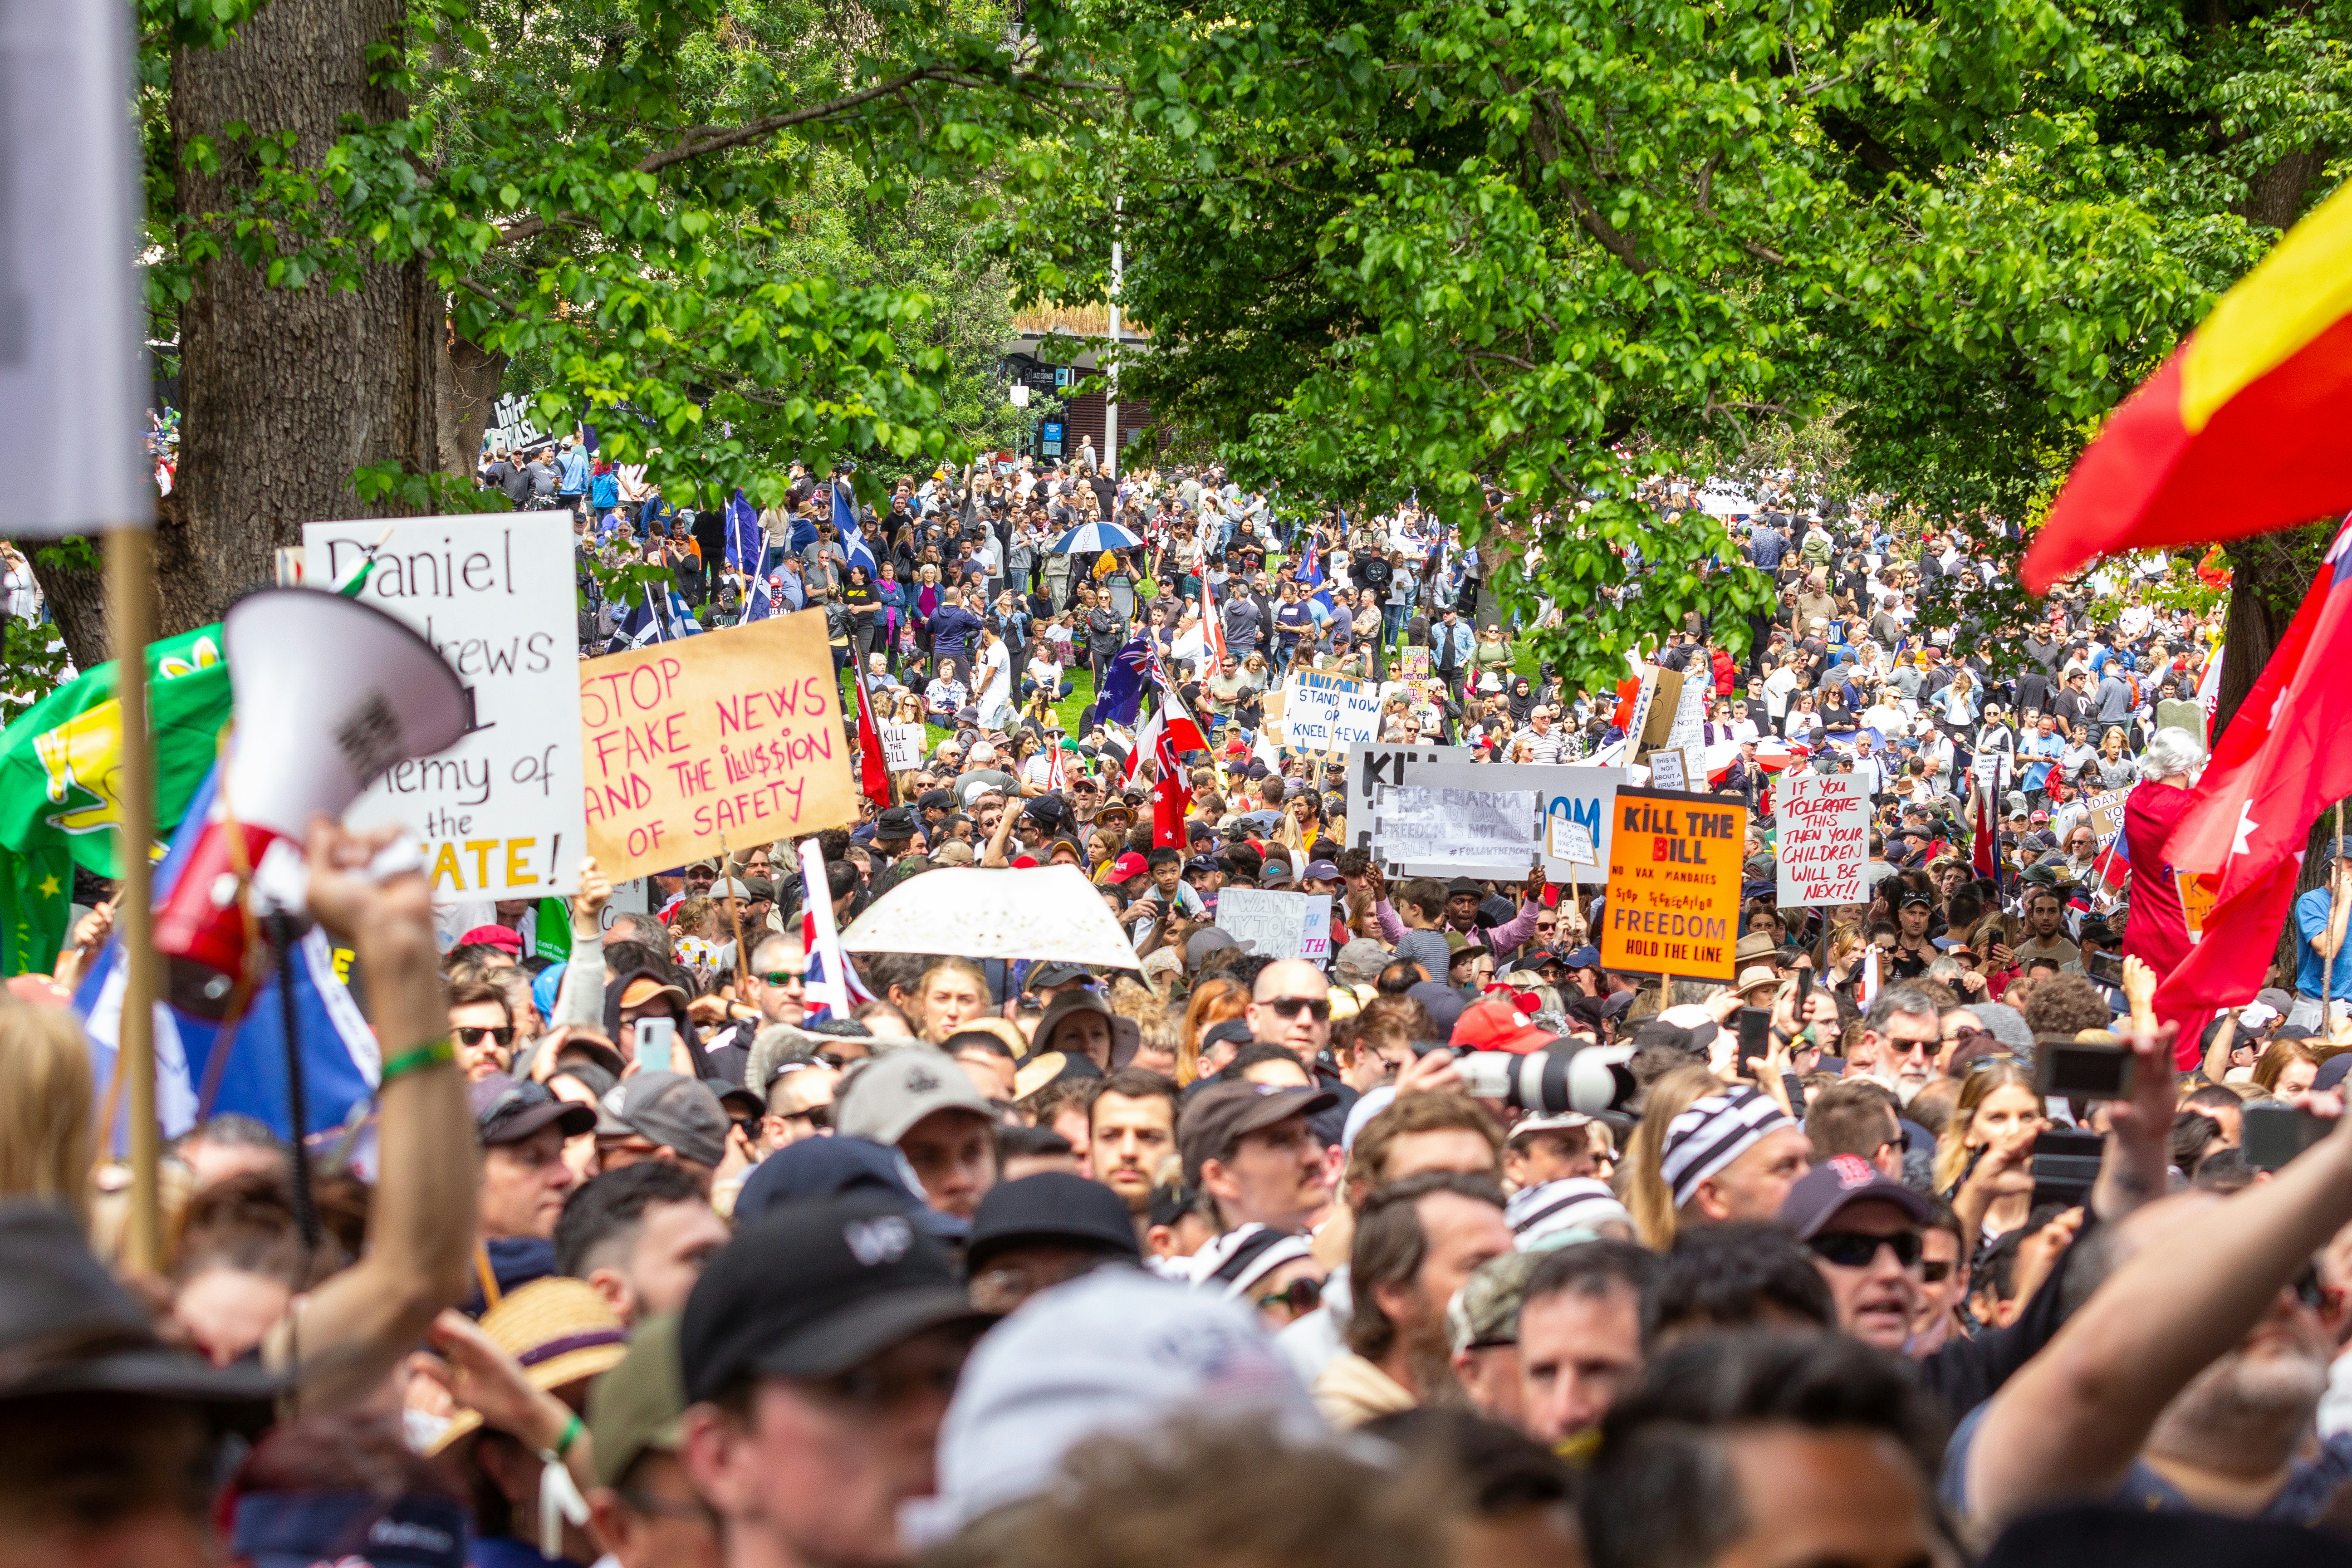 Melbourne's Freedom protests rally and march in the city November 20th 2021 - over 200,000 people marched from Parliament to the Flagstaff Gardens. A happy family friendly crowd singing and chanting \